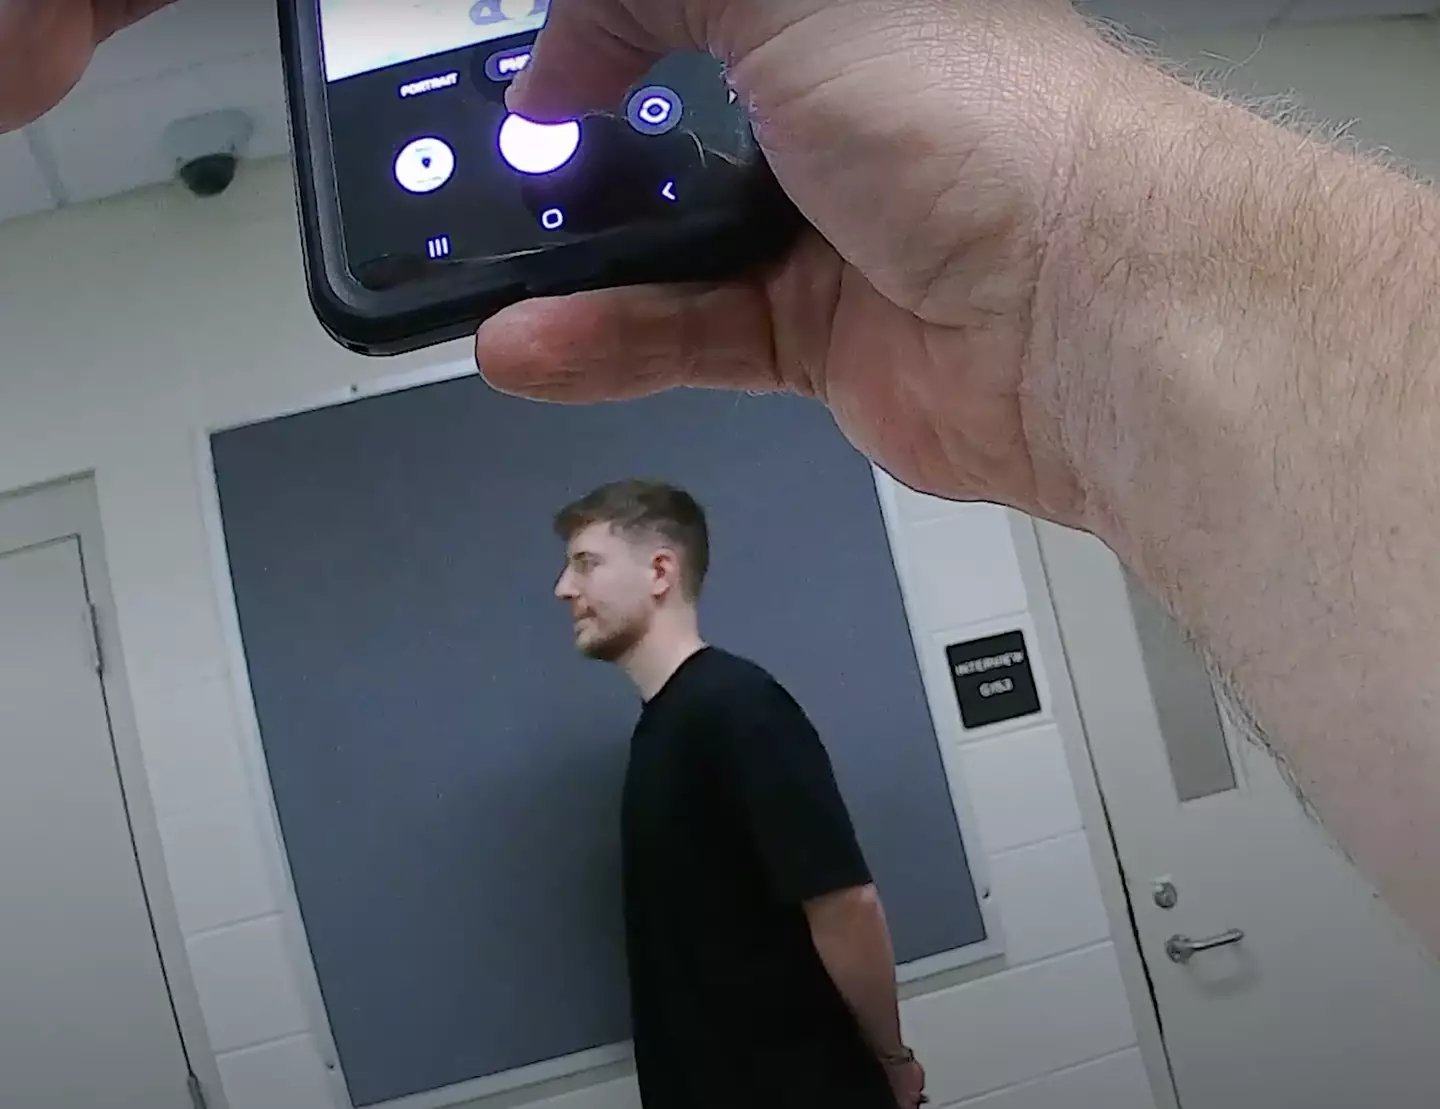 MrBeast having his mugshot taken while a police officer snaps a photo.